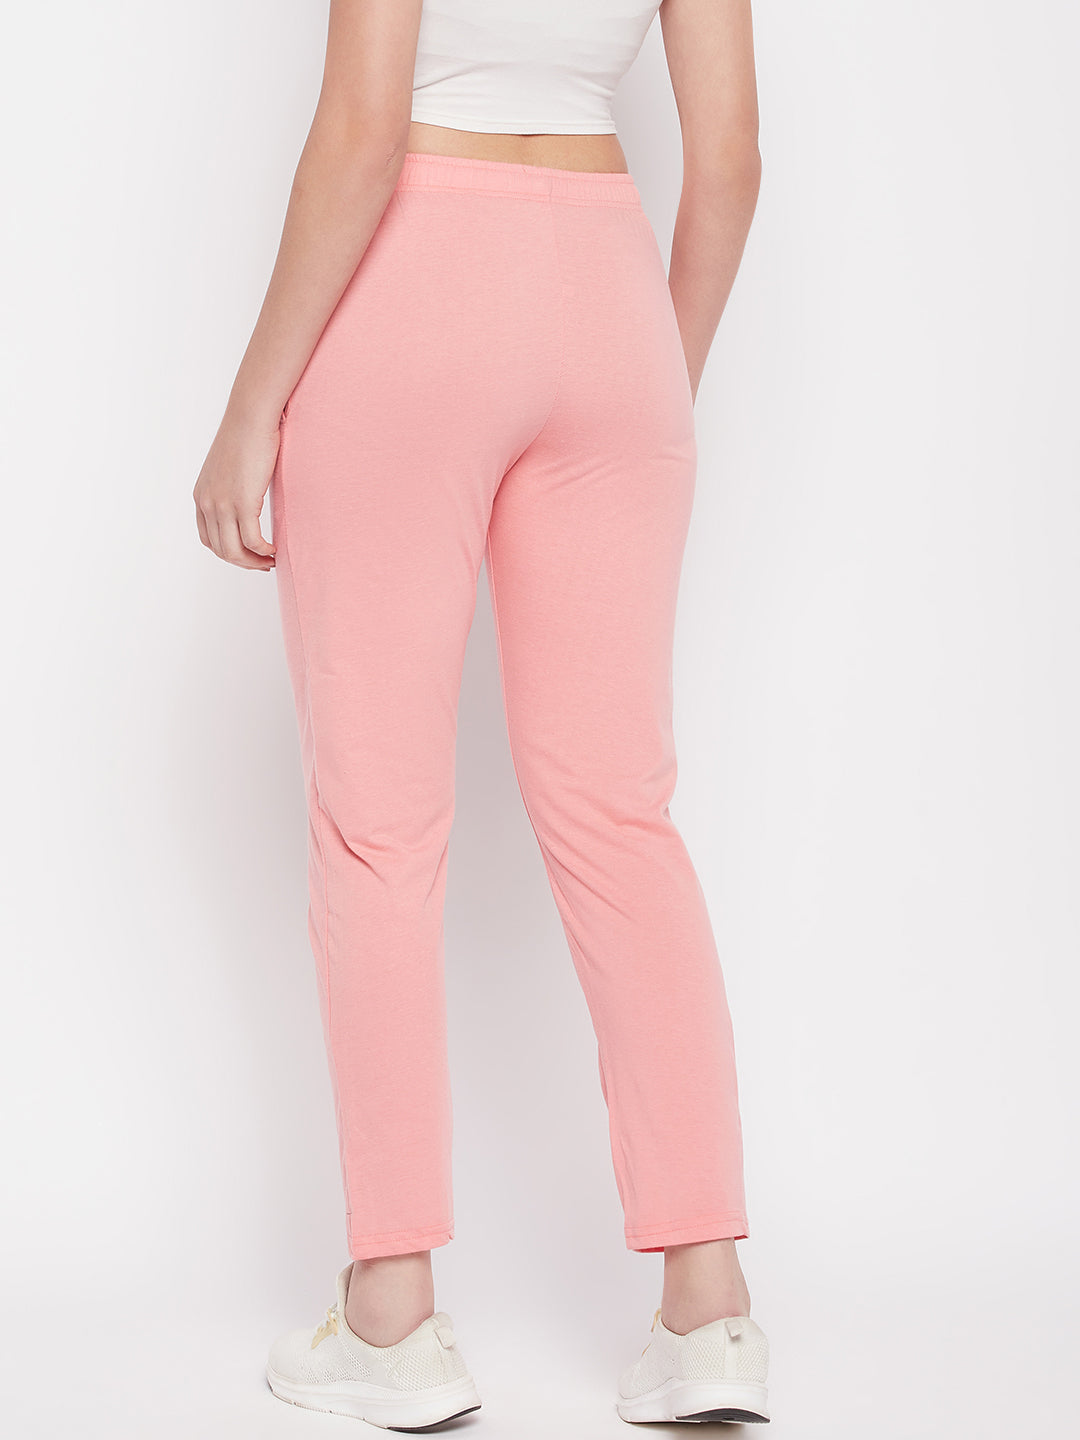 Clora Peach Solid Mid Rise Cotton Track Pants